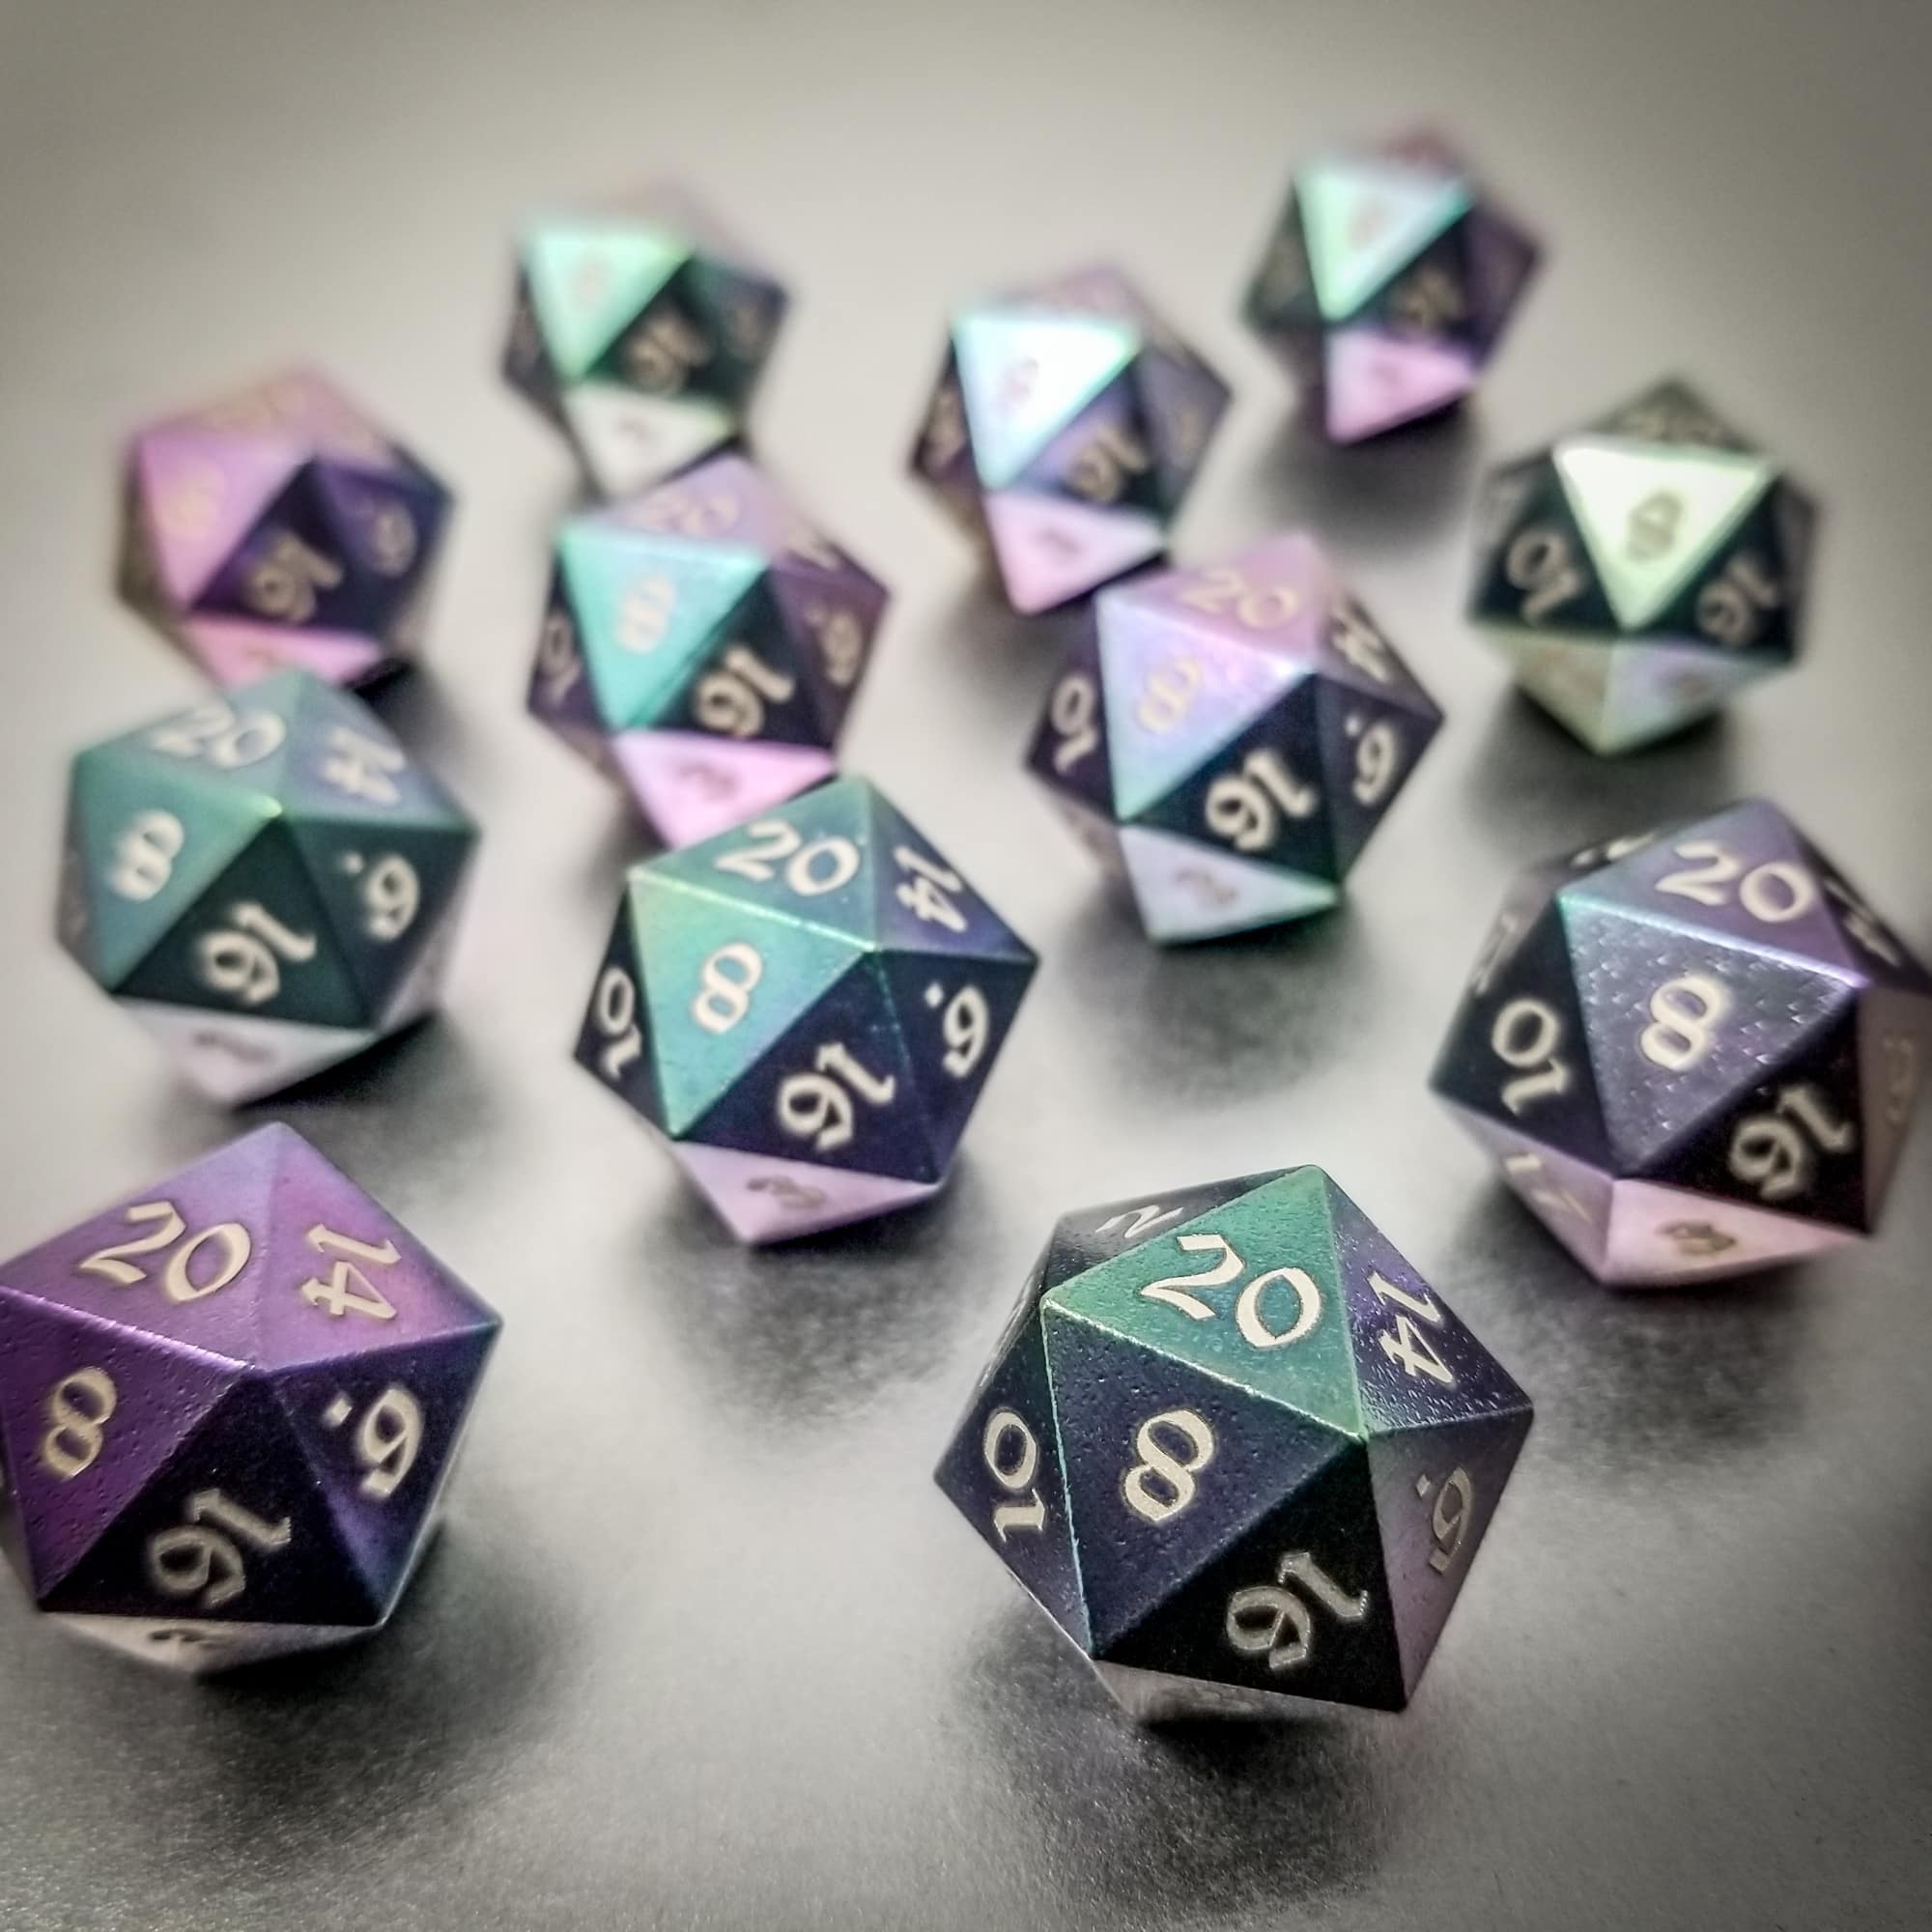 Tungsten d20s group square